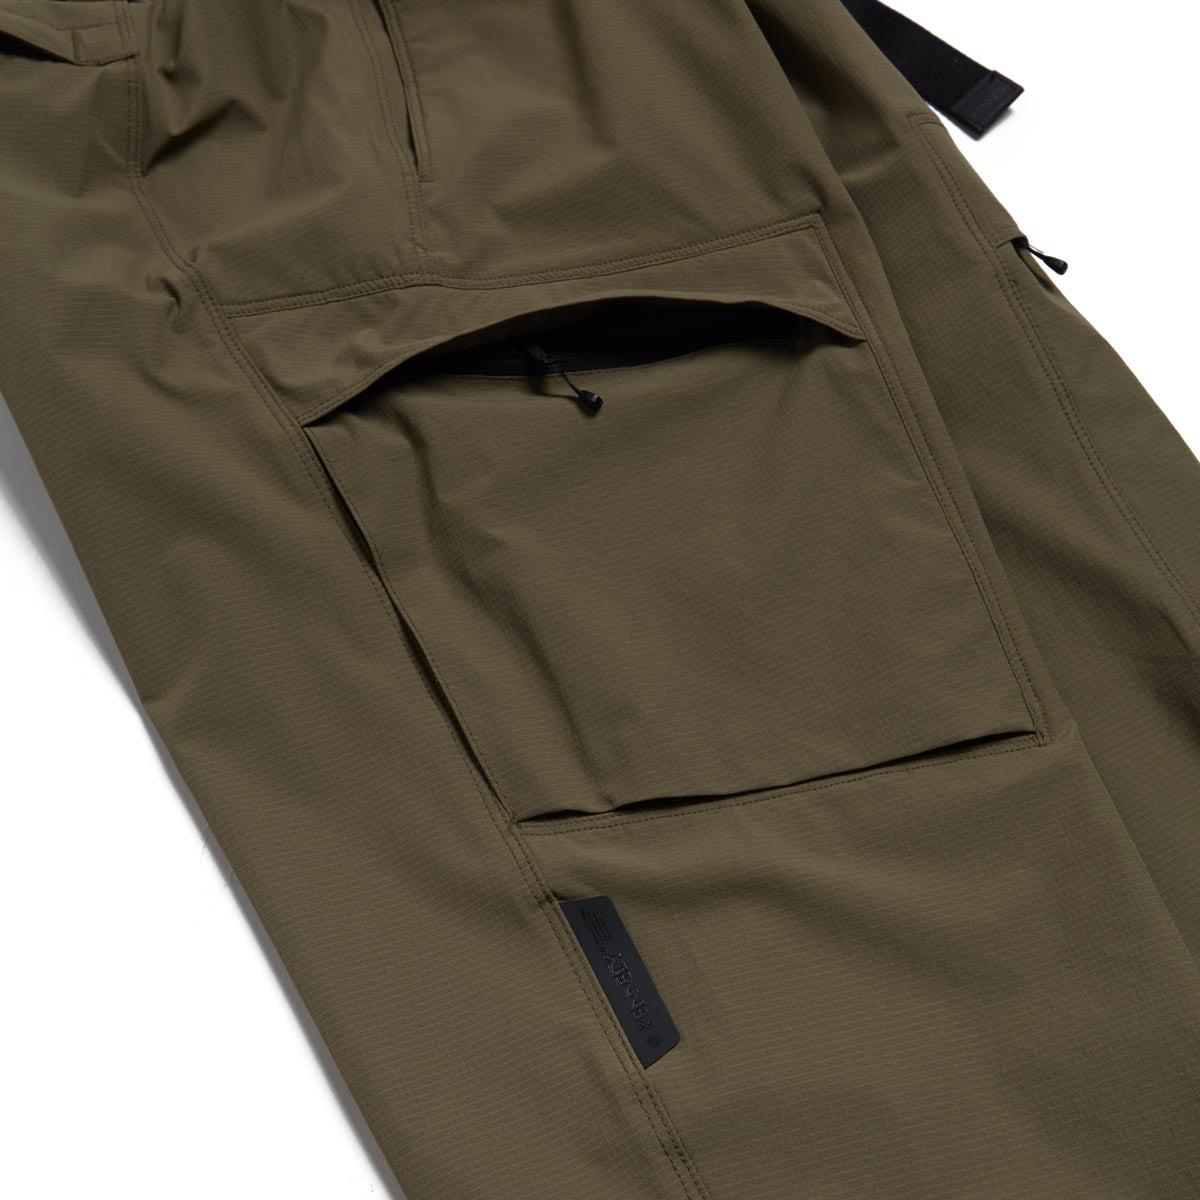 Kennedy The Ascension Cargo Pants - Wet Sand image 3